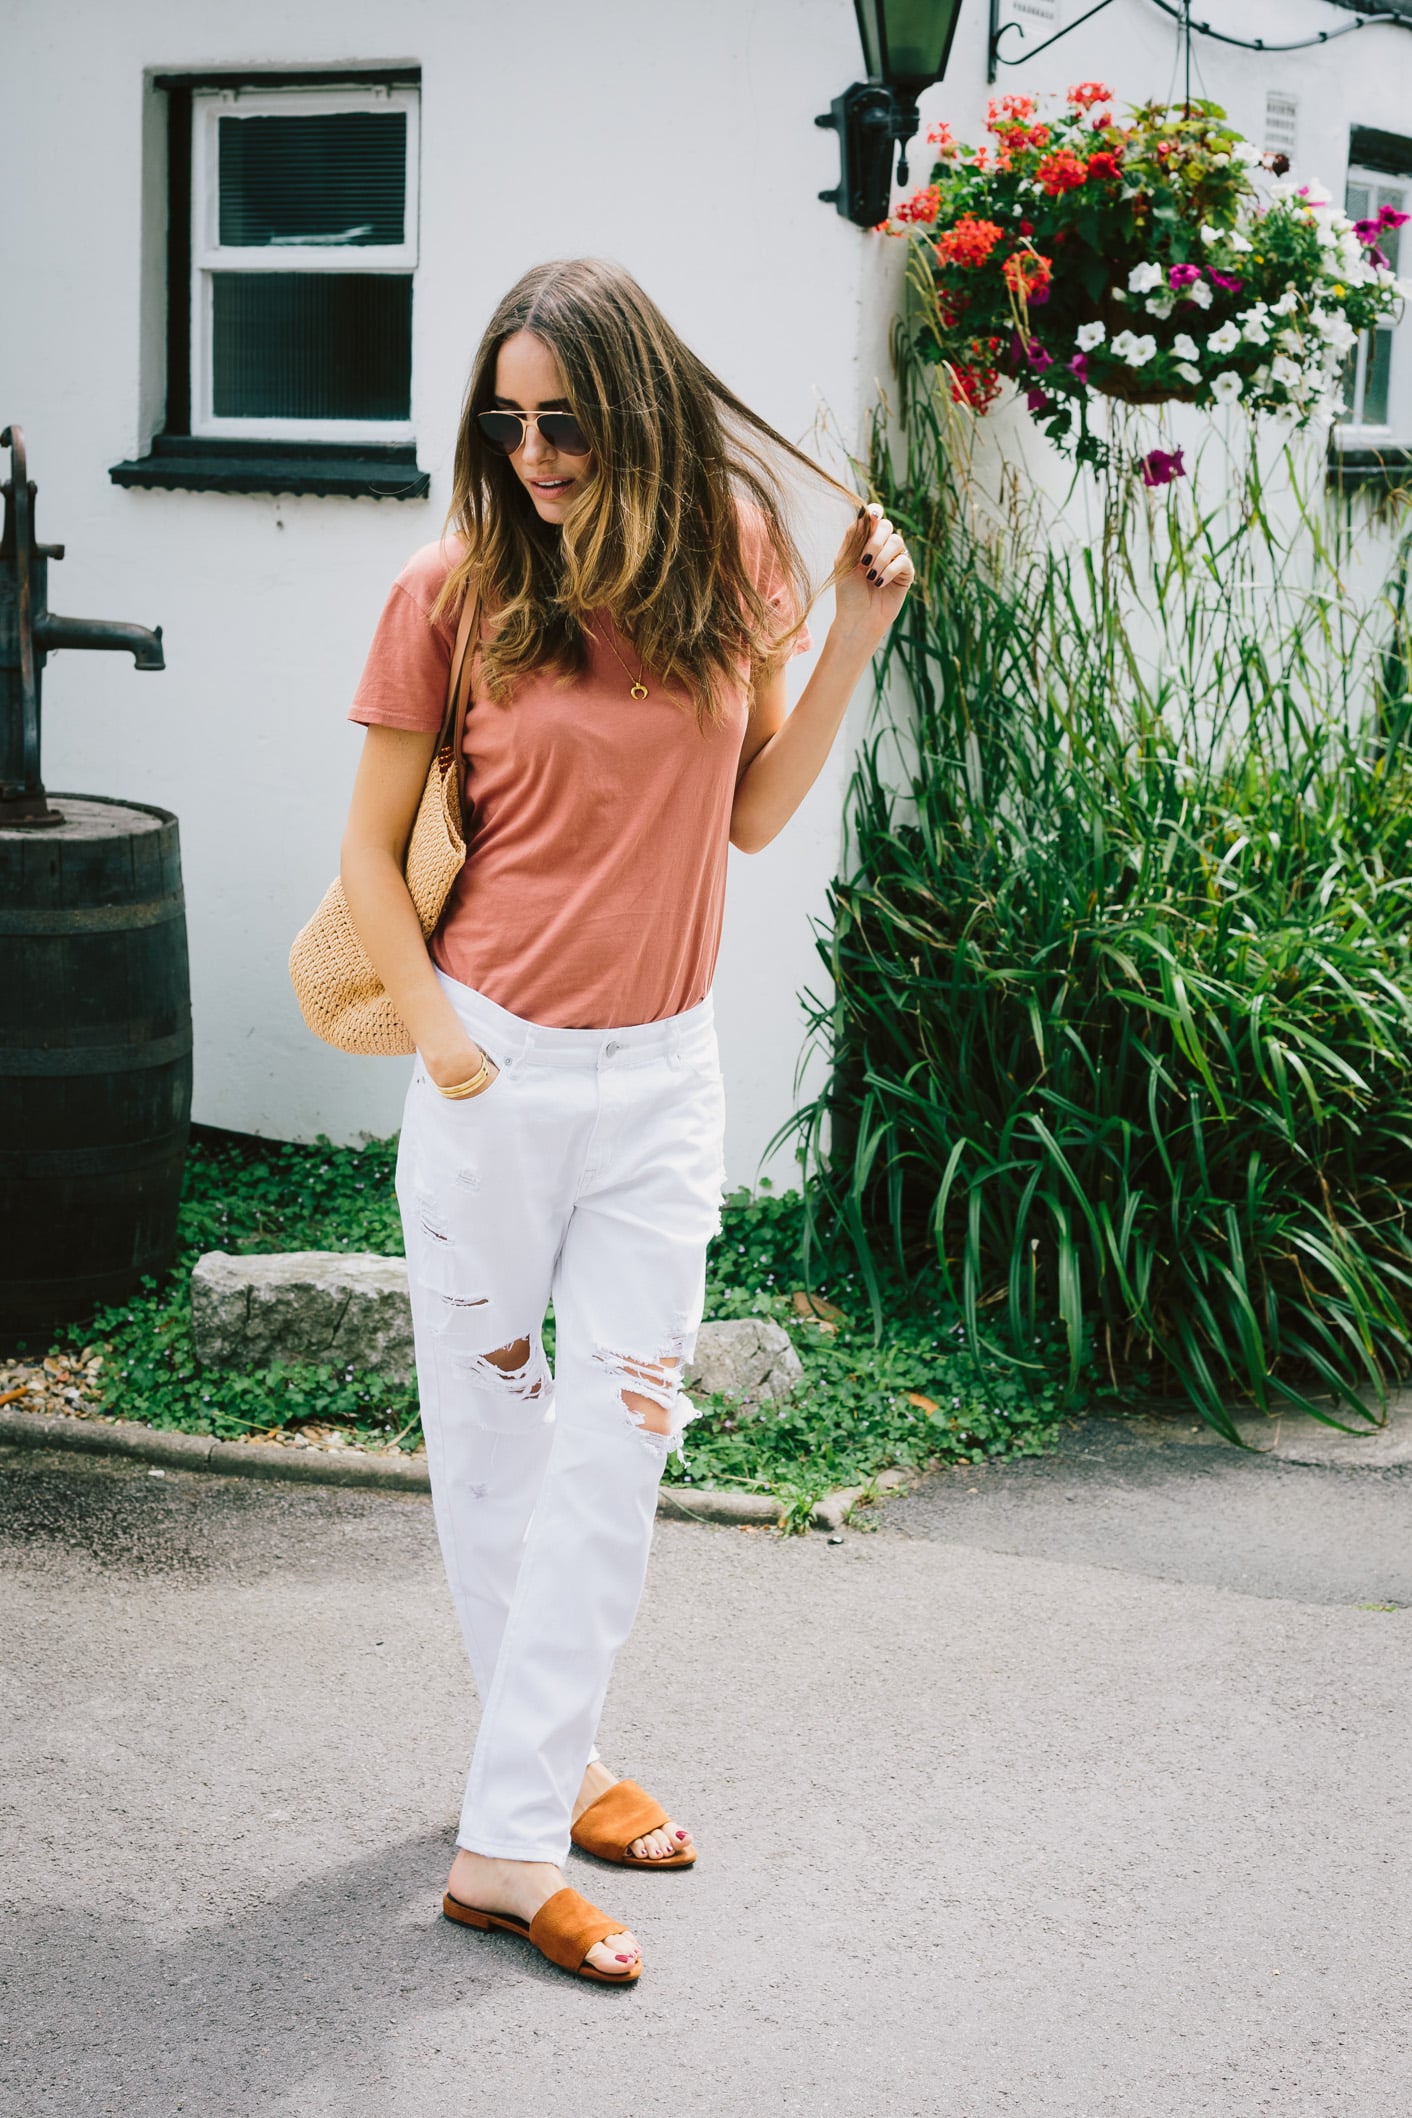 Louise Roe wearing a casual off duty style look with tee and jean